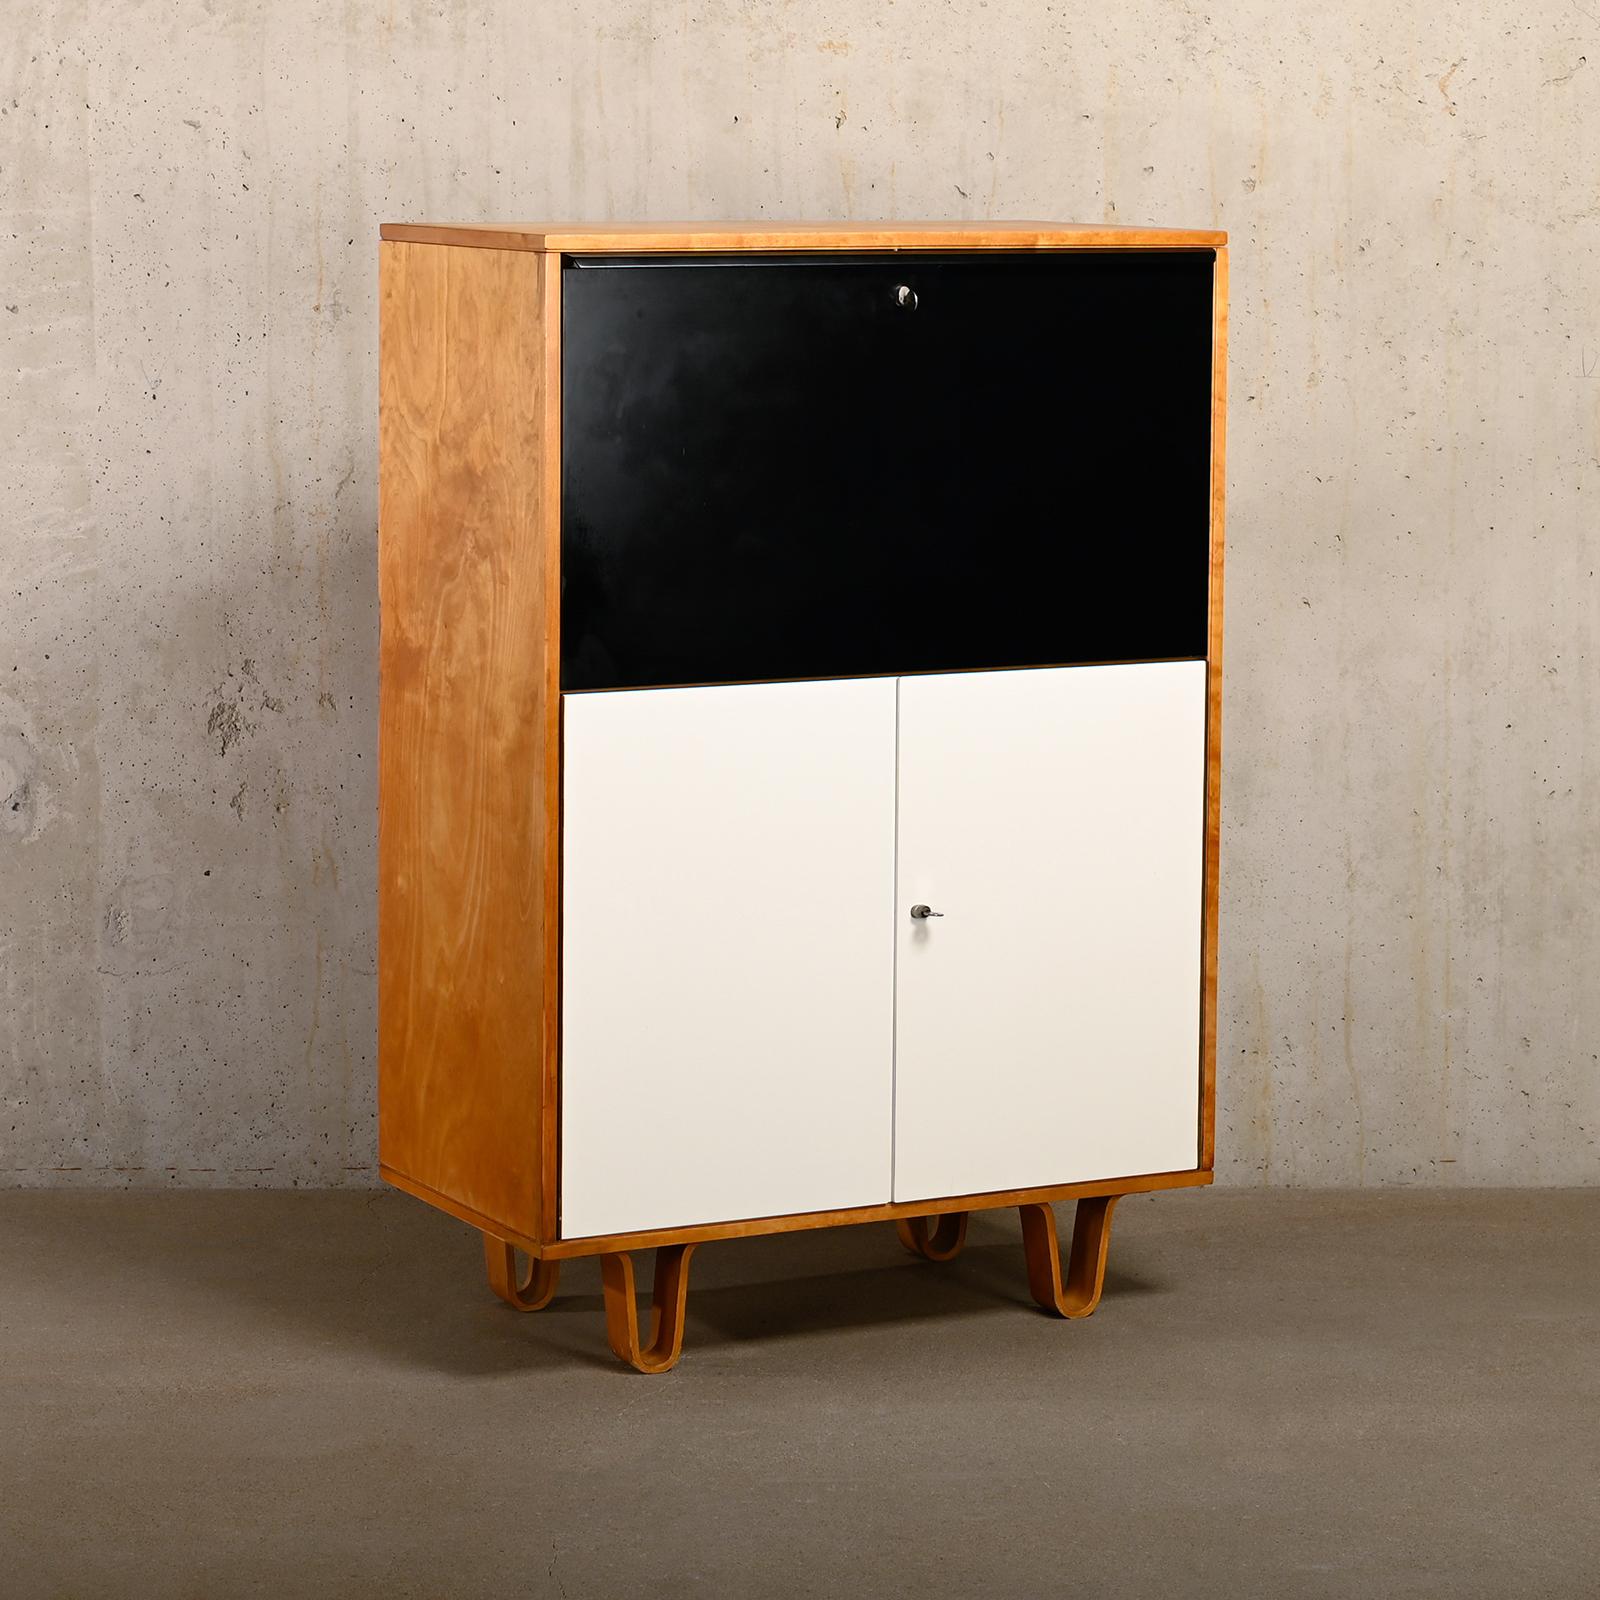 Stylish Secretaire Model CB07 designed by Cees Braakman and manufactured by Pastoe in the 1950s, the Netherlands. This Secretaire was part of the 'Birch Series' of Pastoe and inspired by the new molded plywood technics that came available in the mid